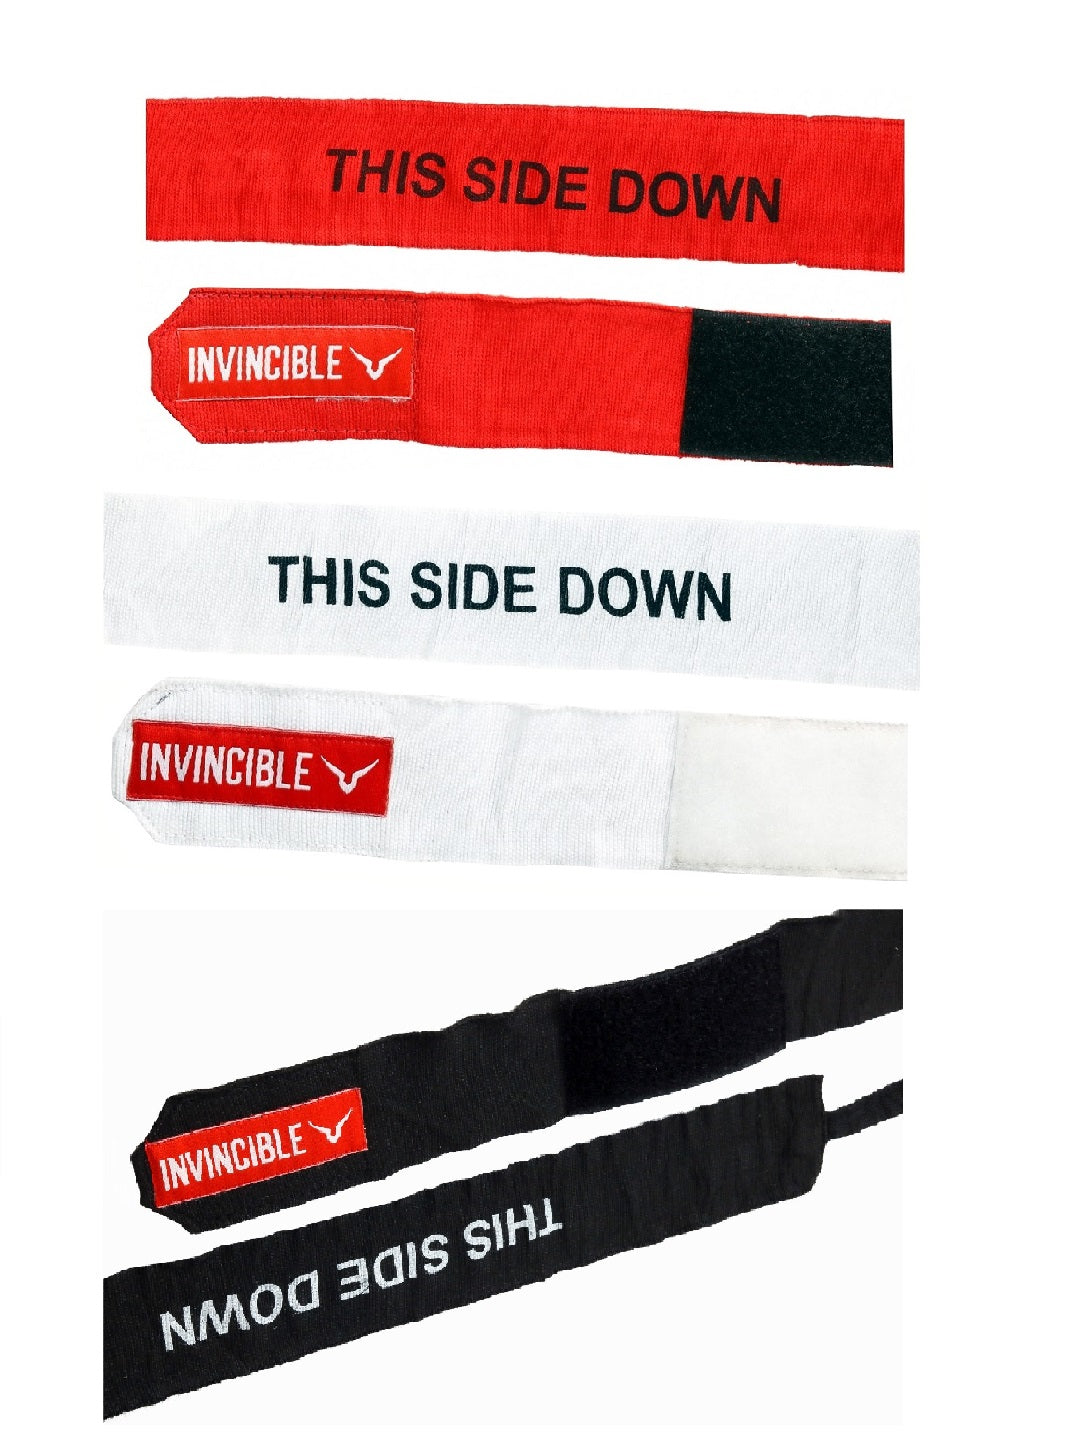 Invincible Classic Hand Wraps Pack of 3